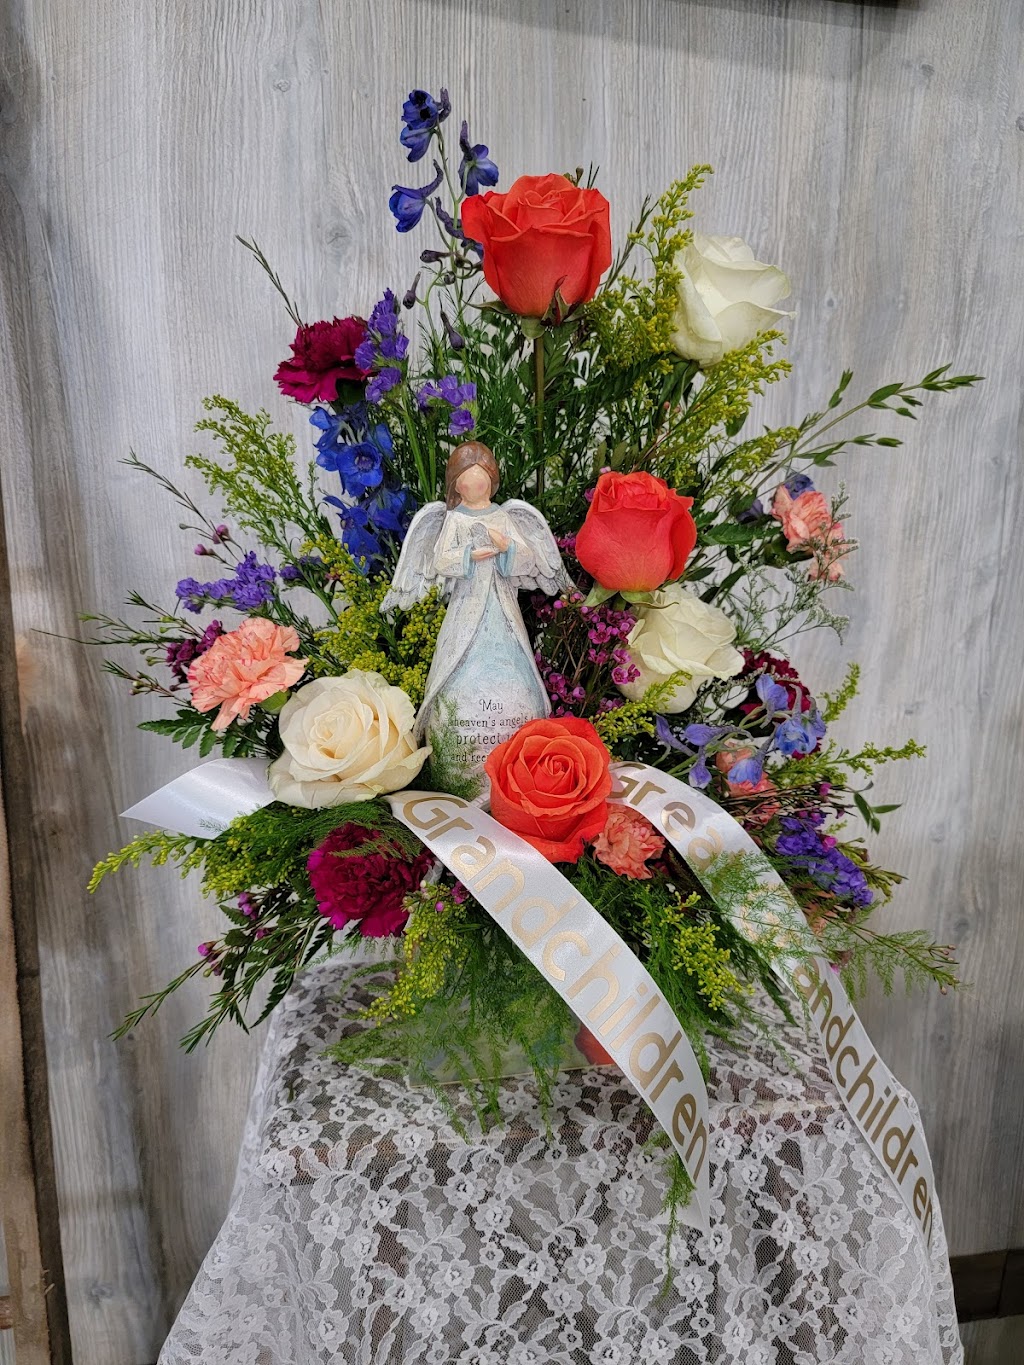 The Flower Barn & Crafts | 5877 Old Lincoln Hwy, Crestline, OH 44827 | Phone: (419) 561-4837